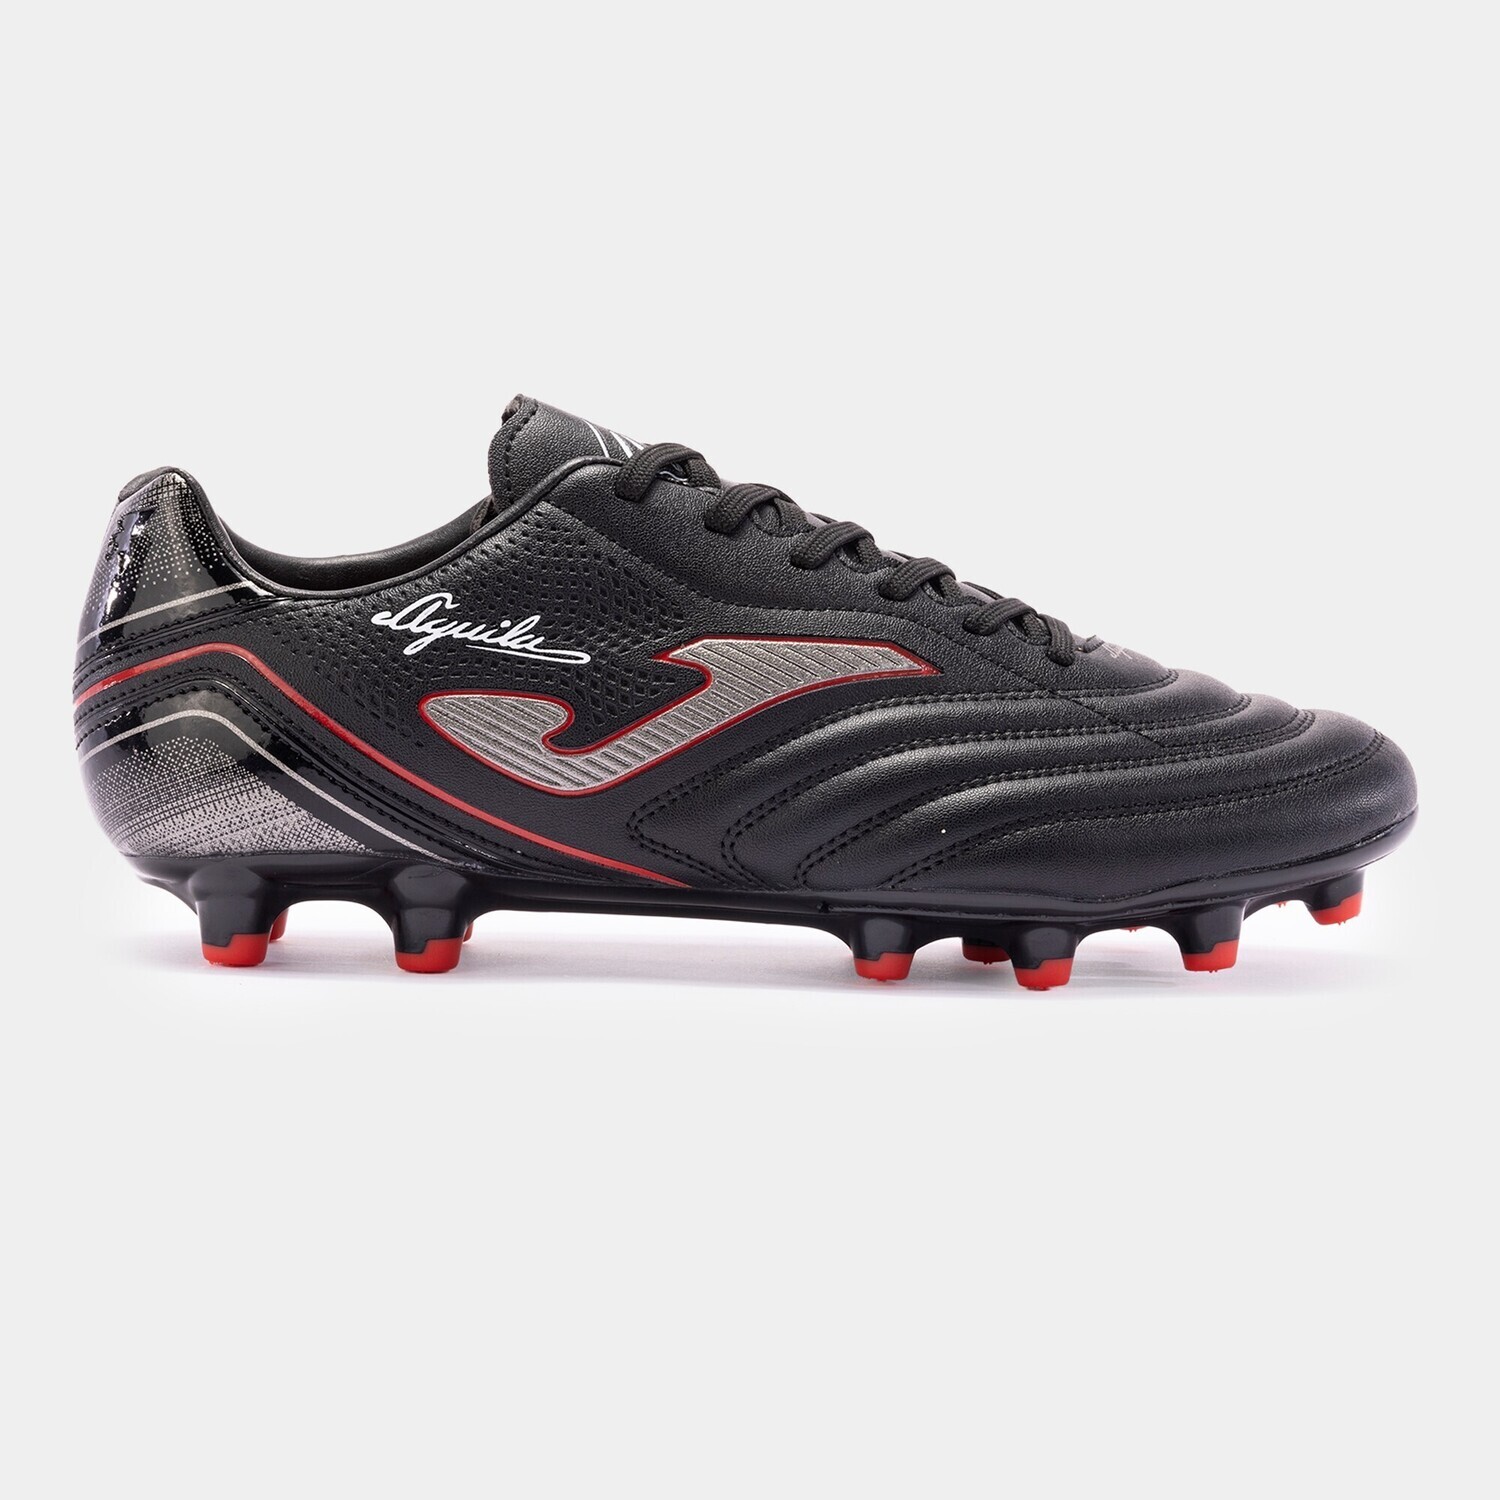 JOMA SHOES AGUILA 2301 BLACK RED FIRM GROUND 6.5-12